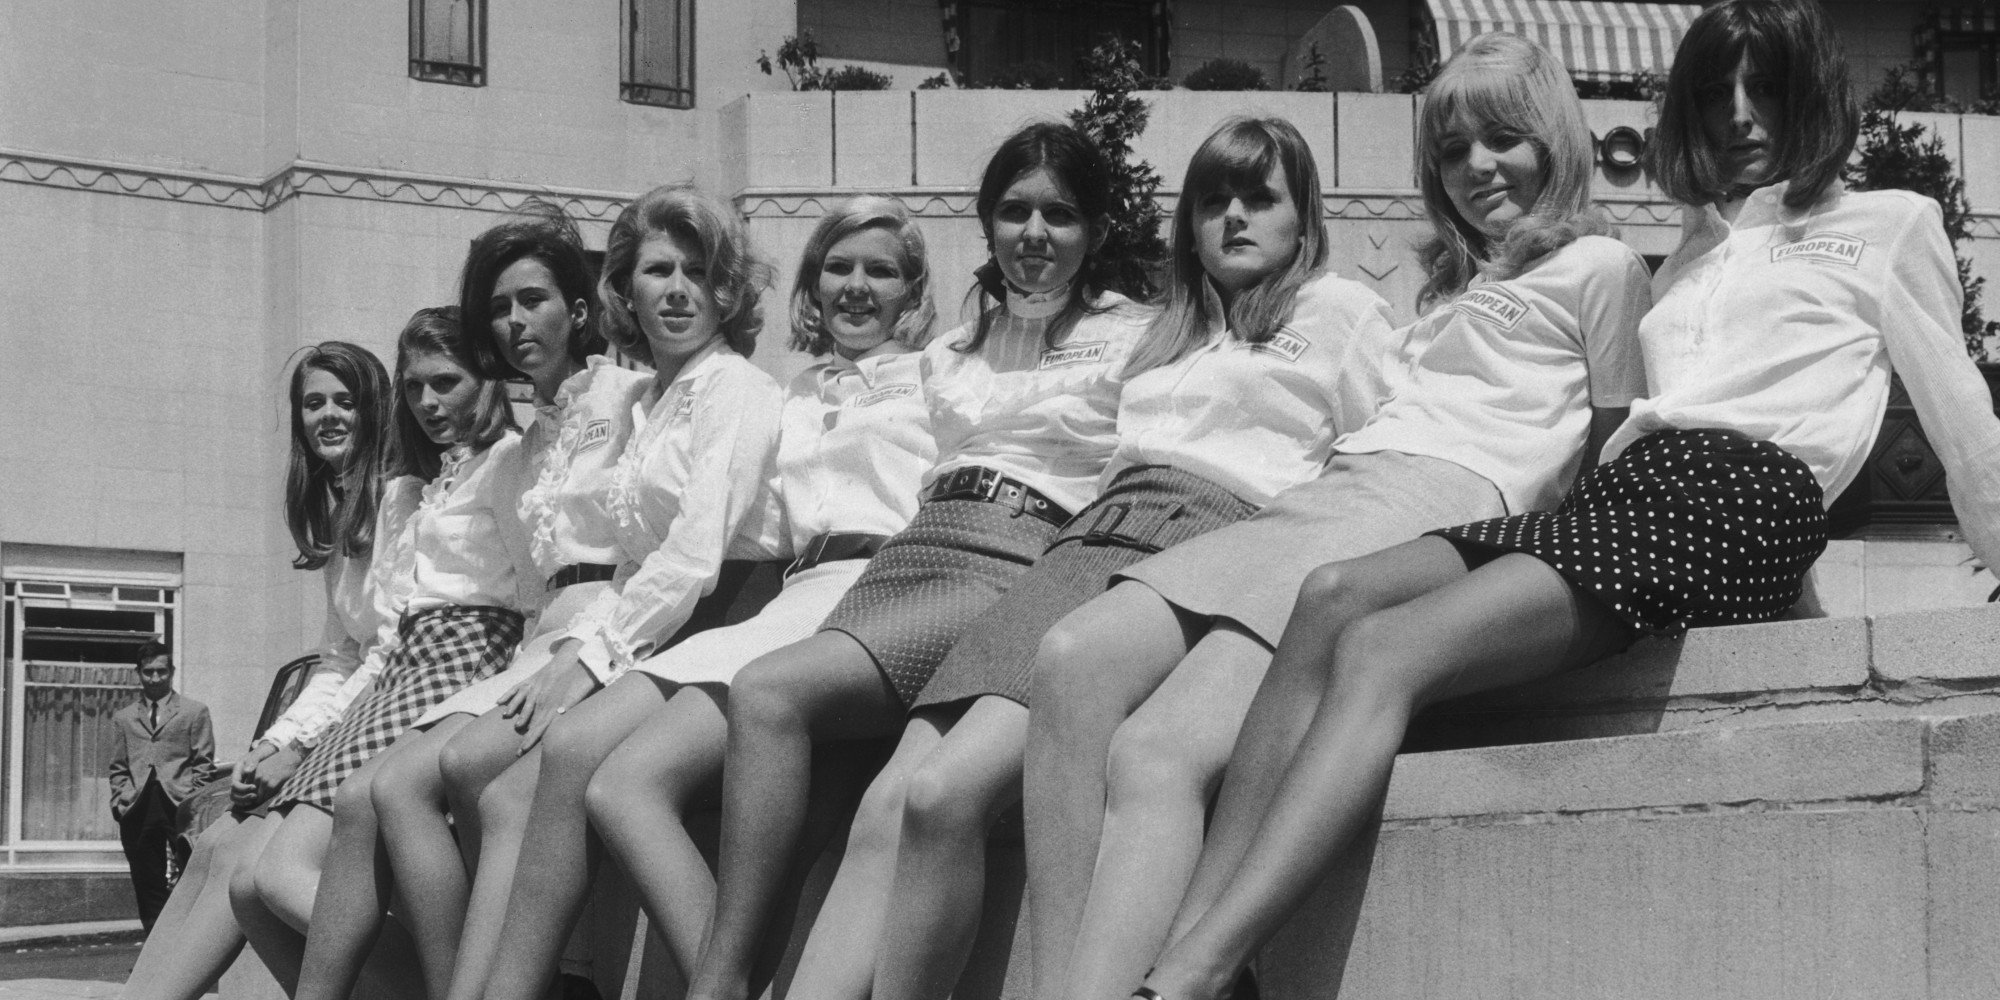 A group of debutantes outside the Dorchester Hotel, London, where they are training to take part in the launch of a new petrol brand from European Petroleum, 31st May 1966. (Photo by Chris Ware/Keystone/Hulton Archive/Getty Images)